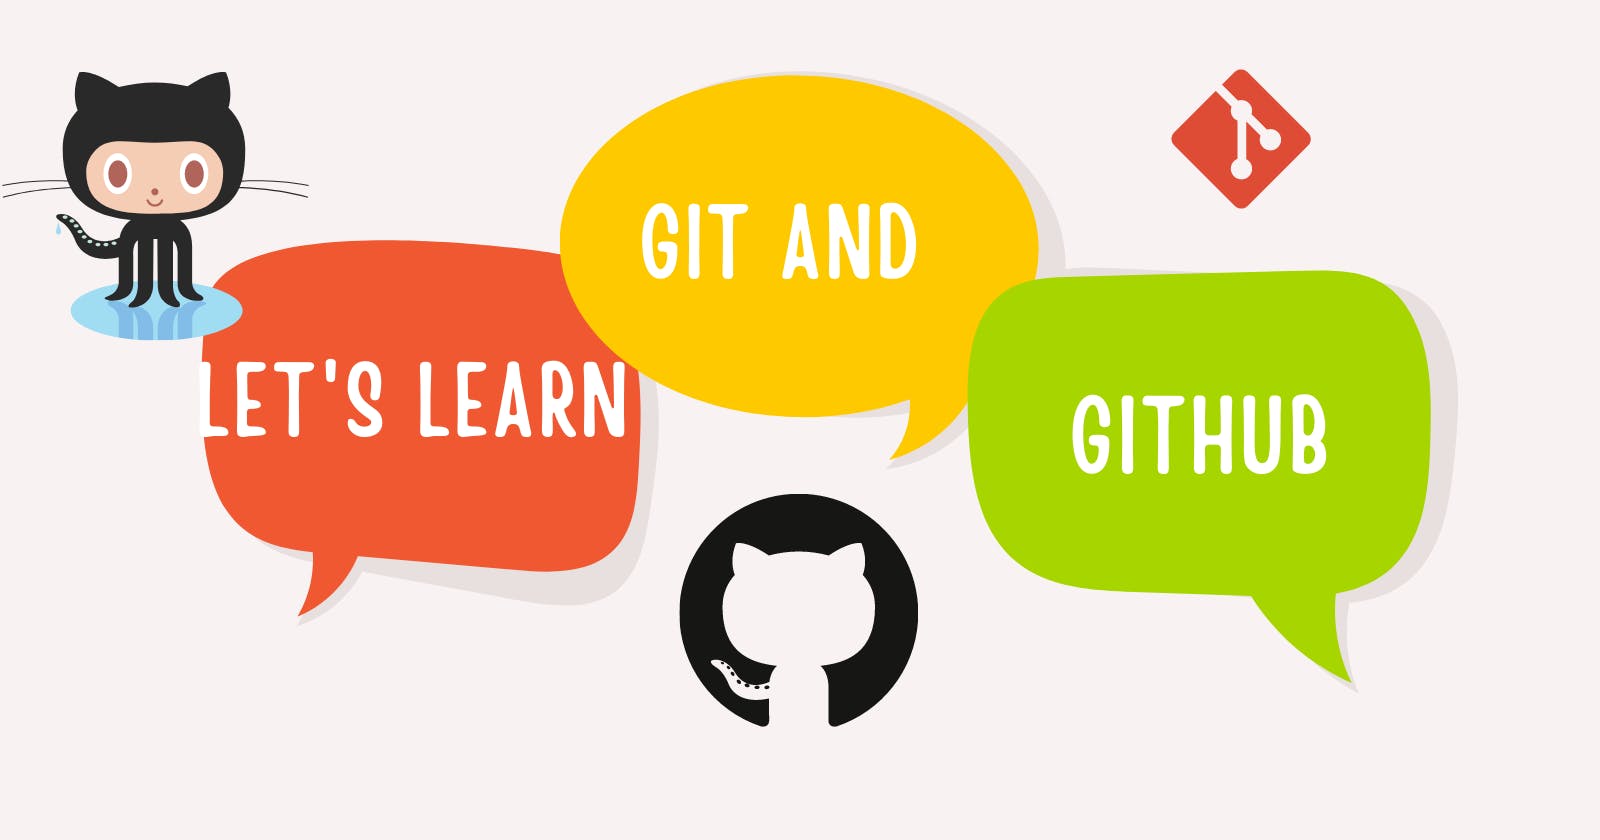 Learn Git and Github in 5 minutes